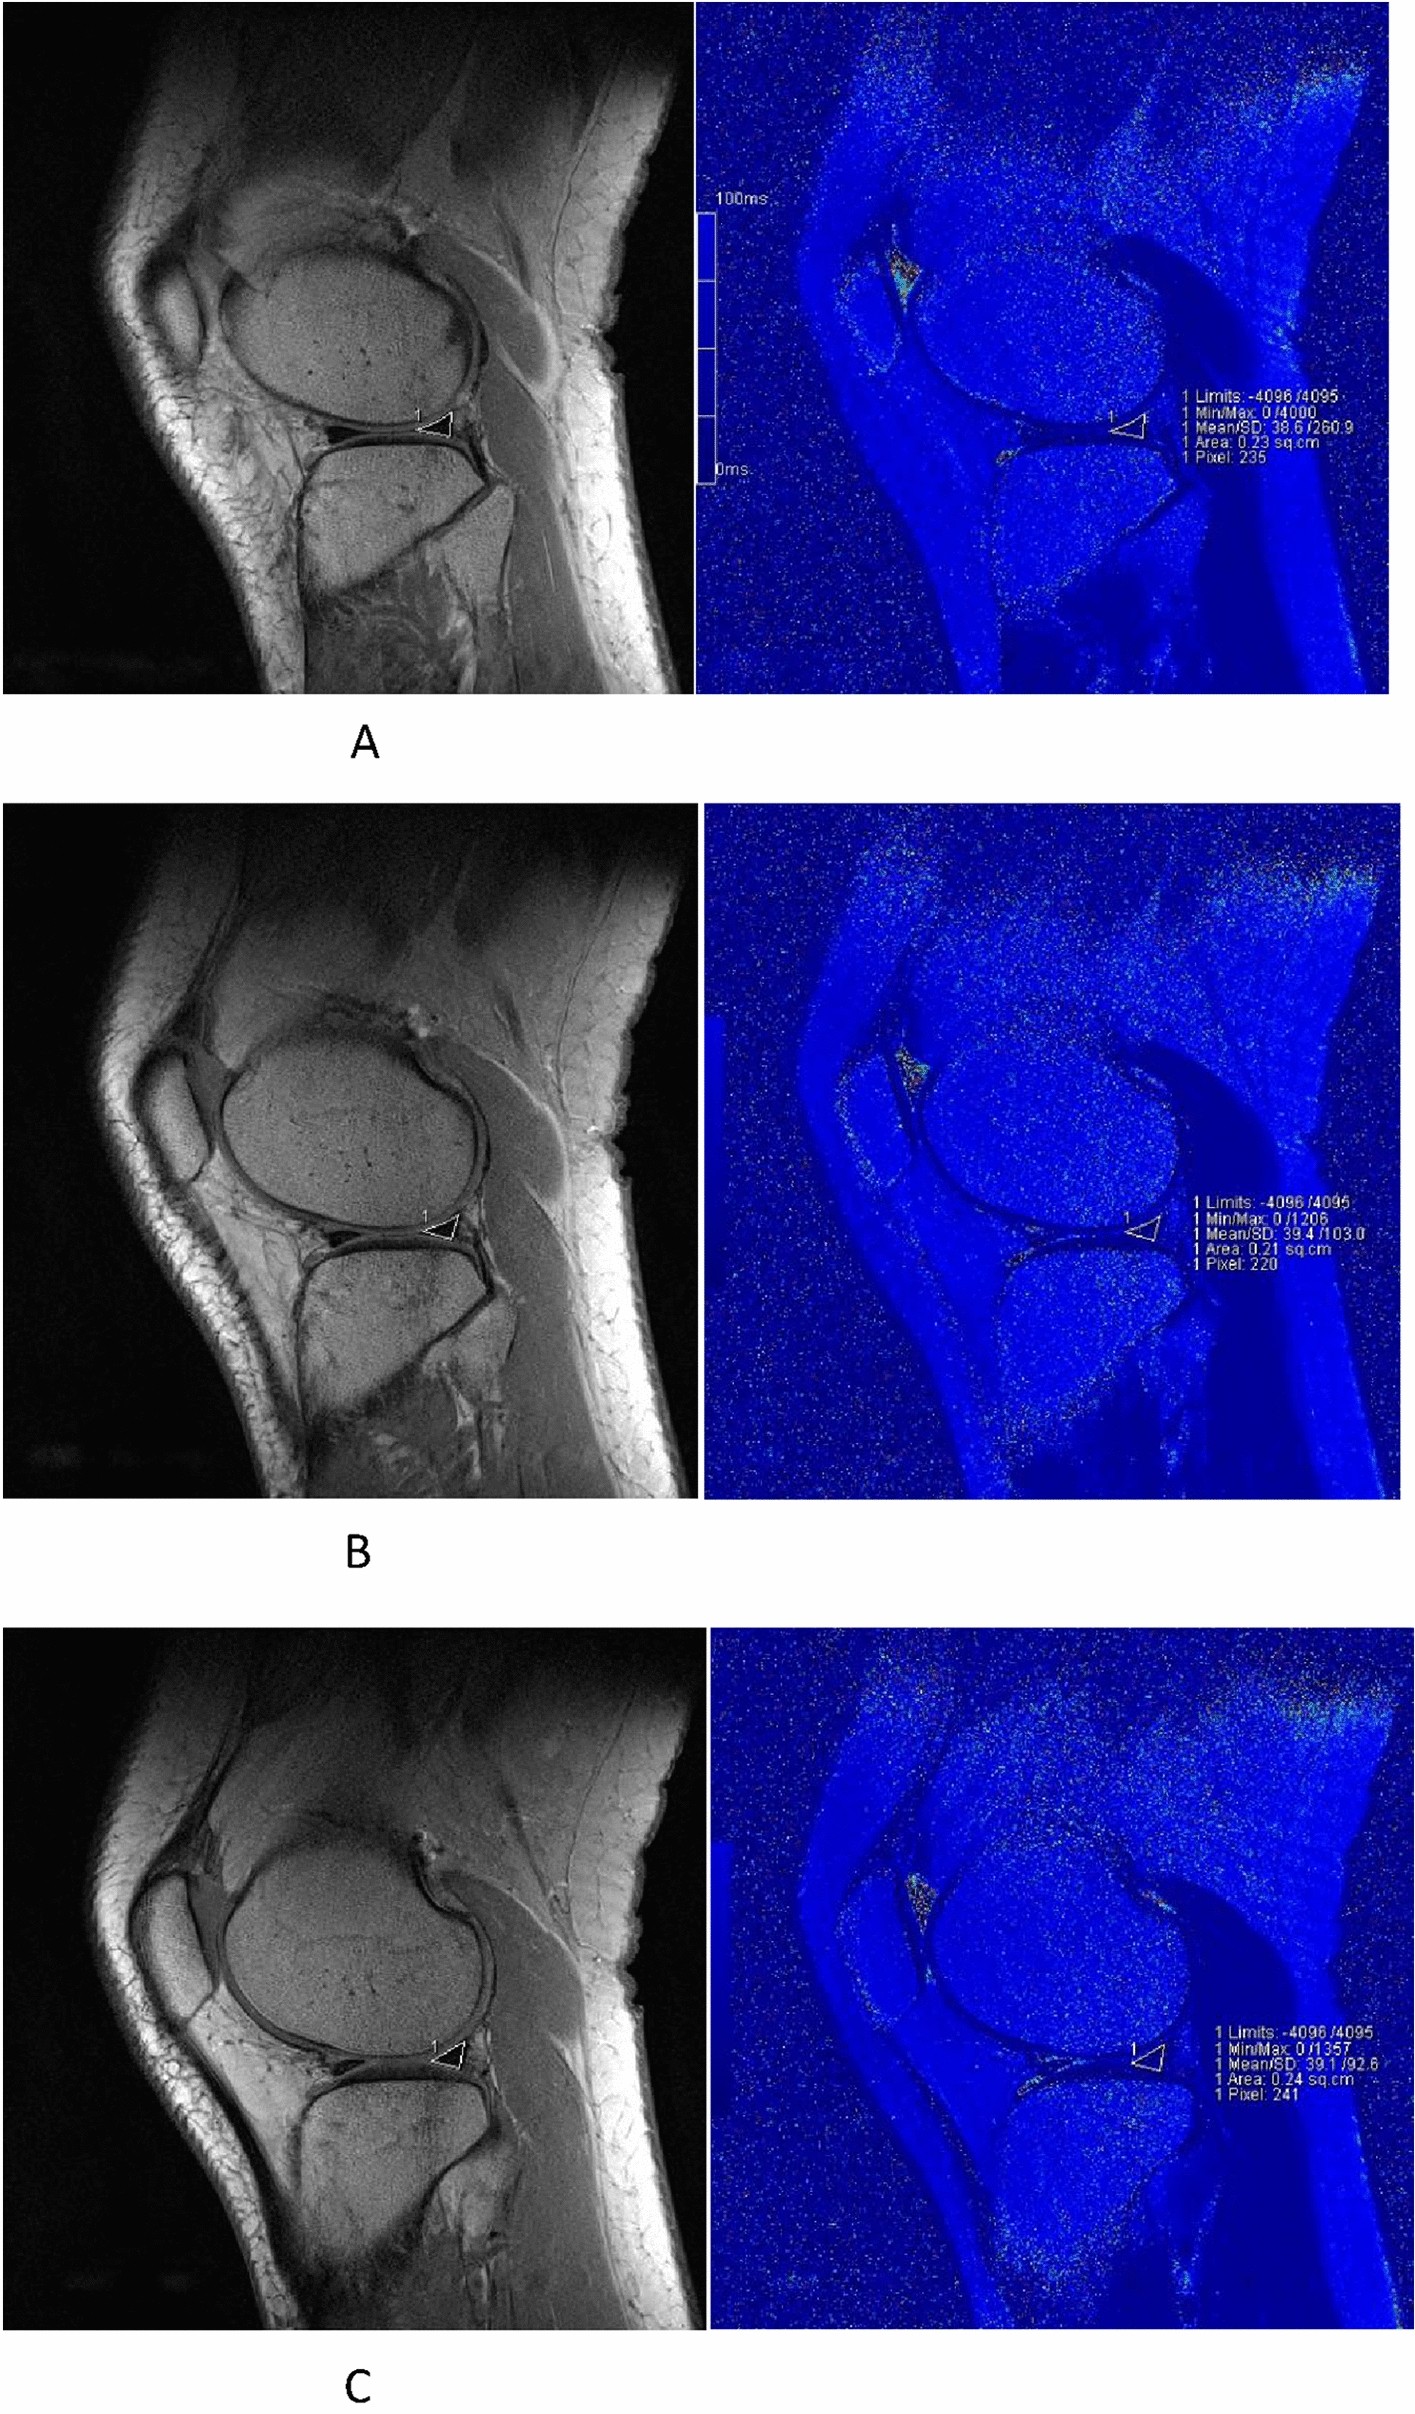 Periodical assessment of four horns of knee meniscus using MR T2 mapping imaging in volunteers before and after amateur marathons Scientific Reports